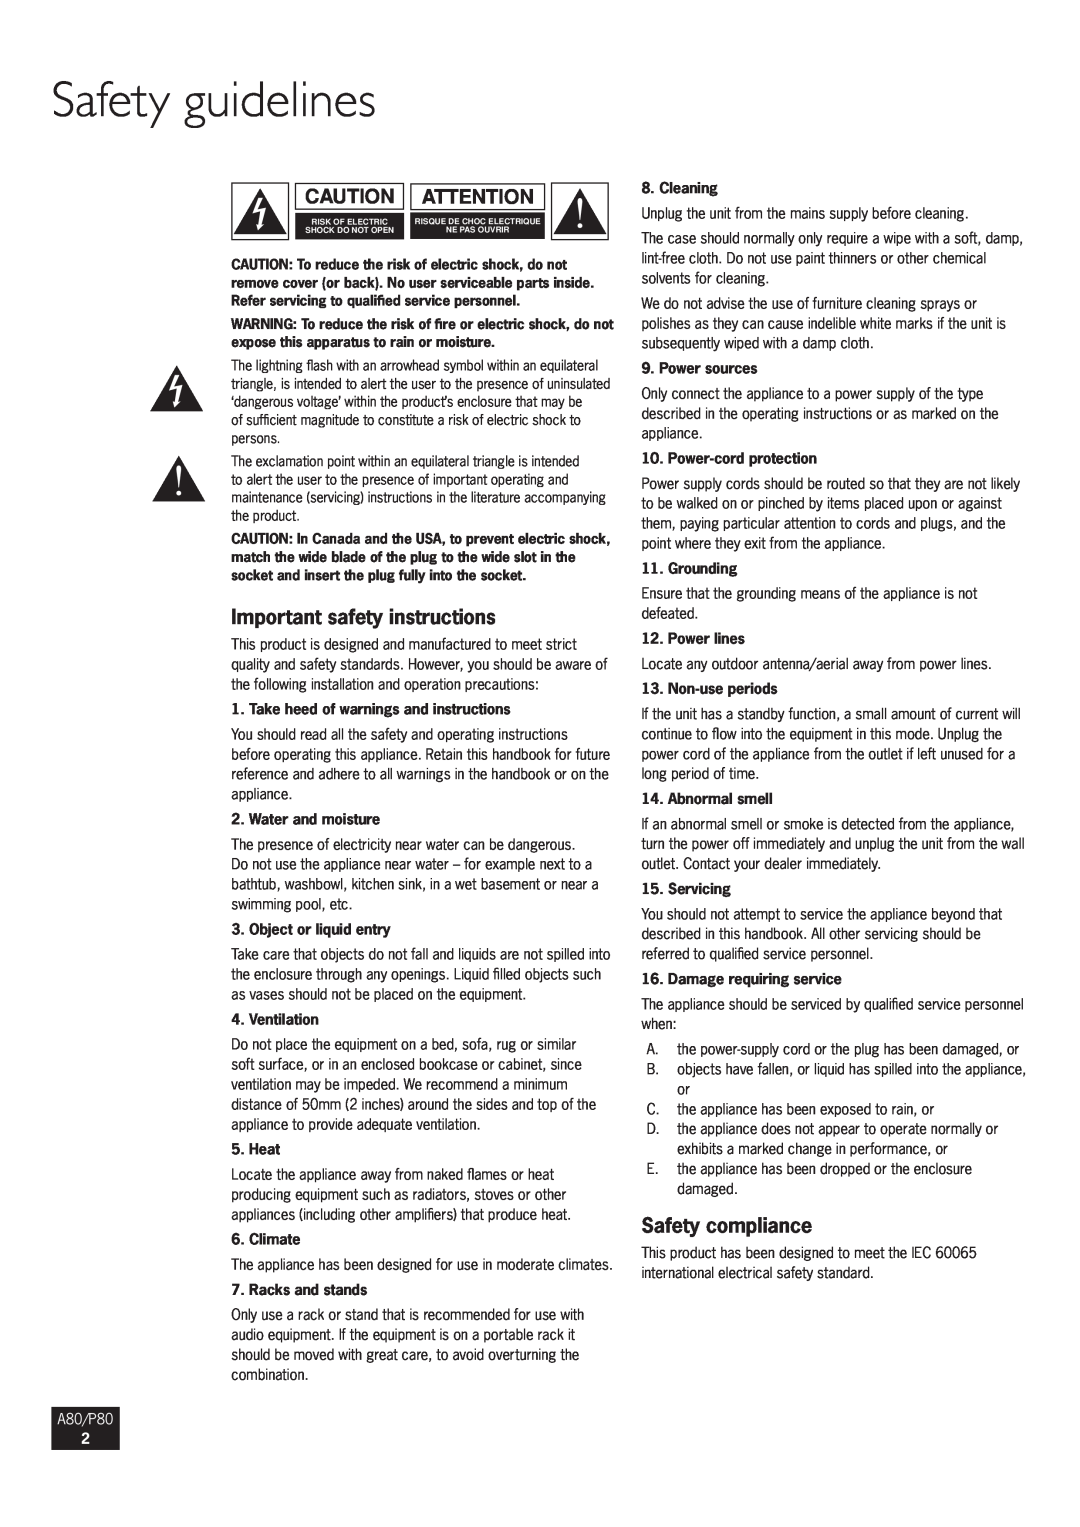 Arcam A80, P80 Safety guidelines, Important safety instructions, Safety compliance, Take heed of warnings and instructions 